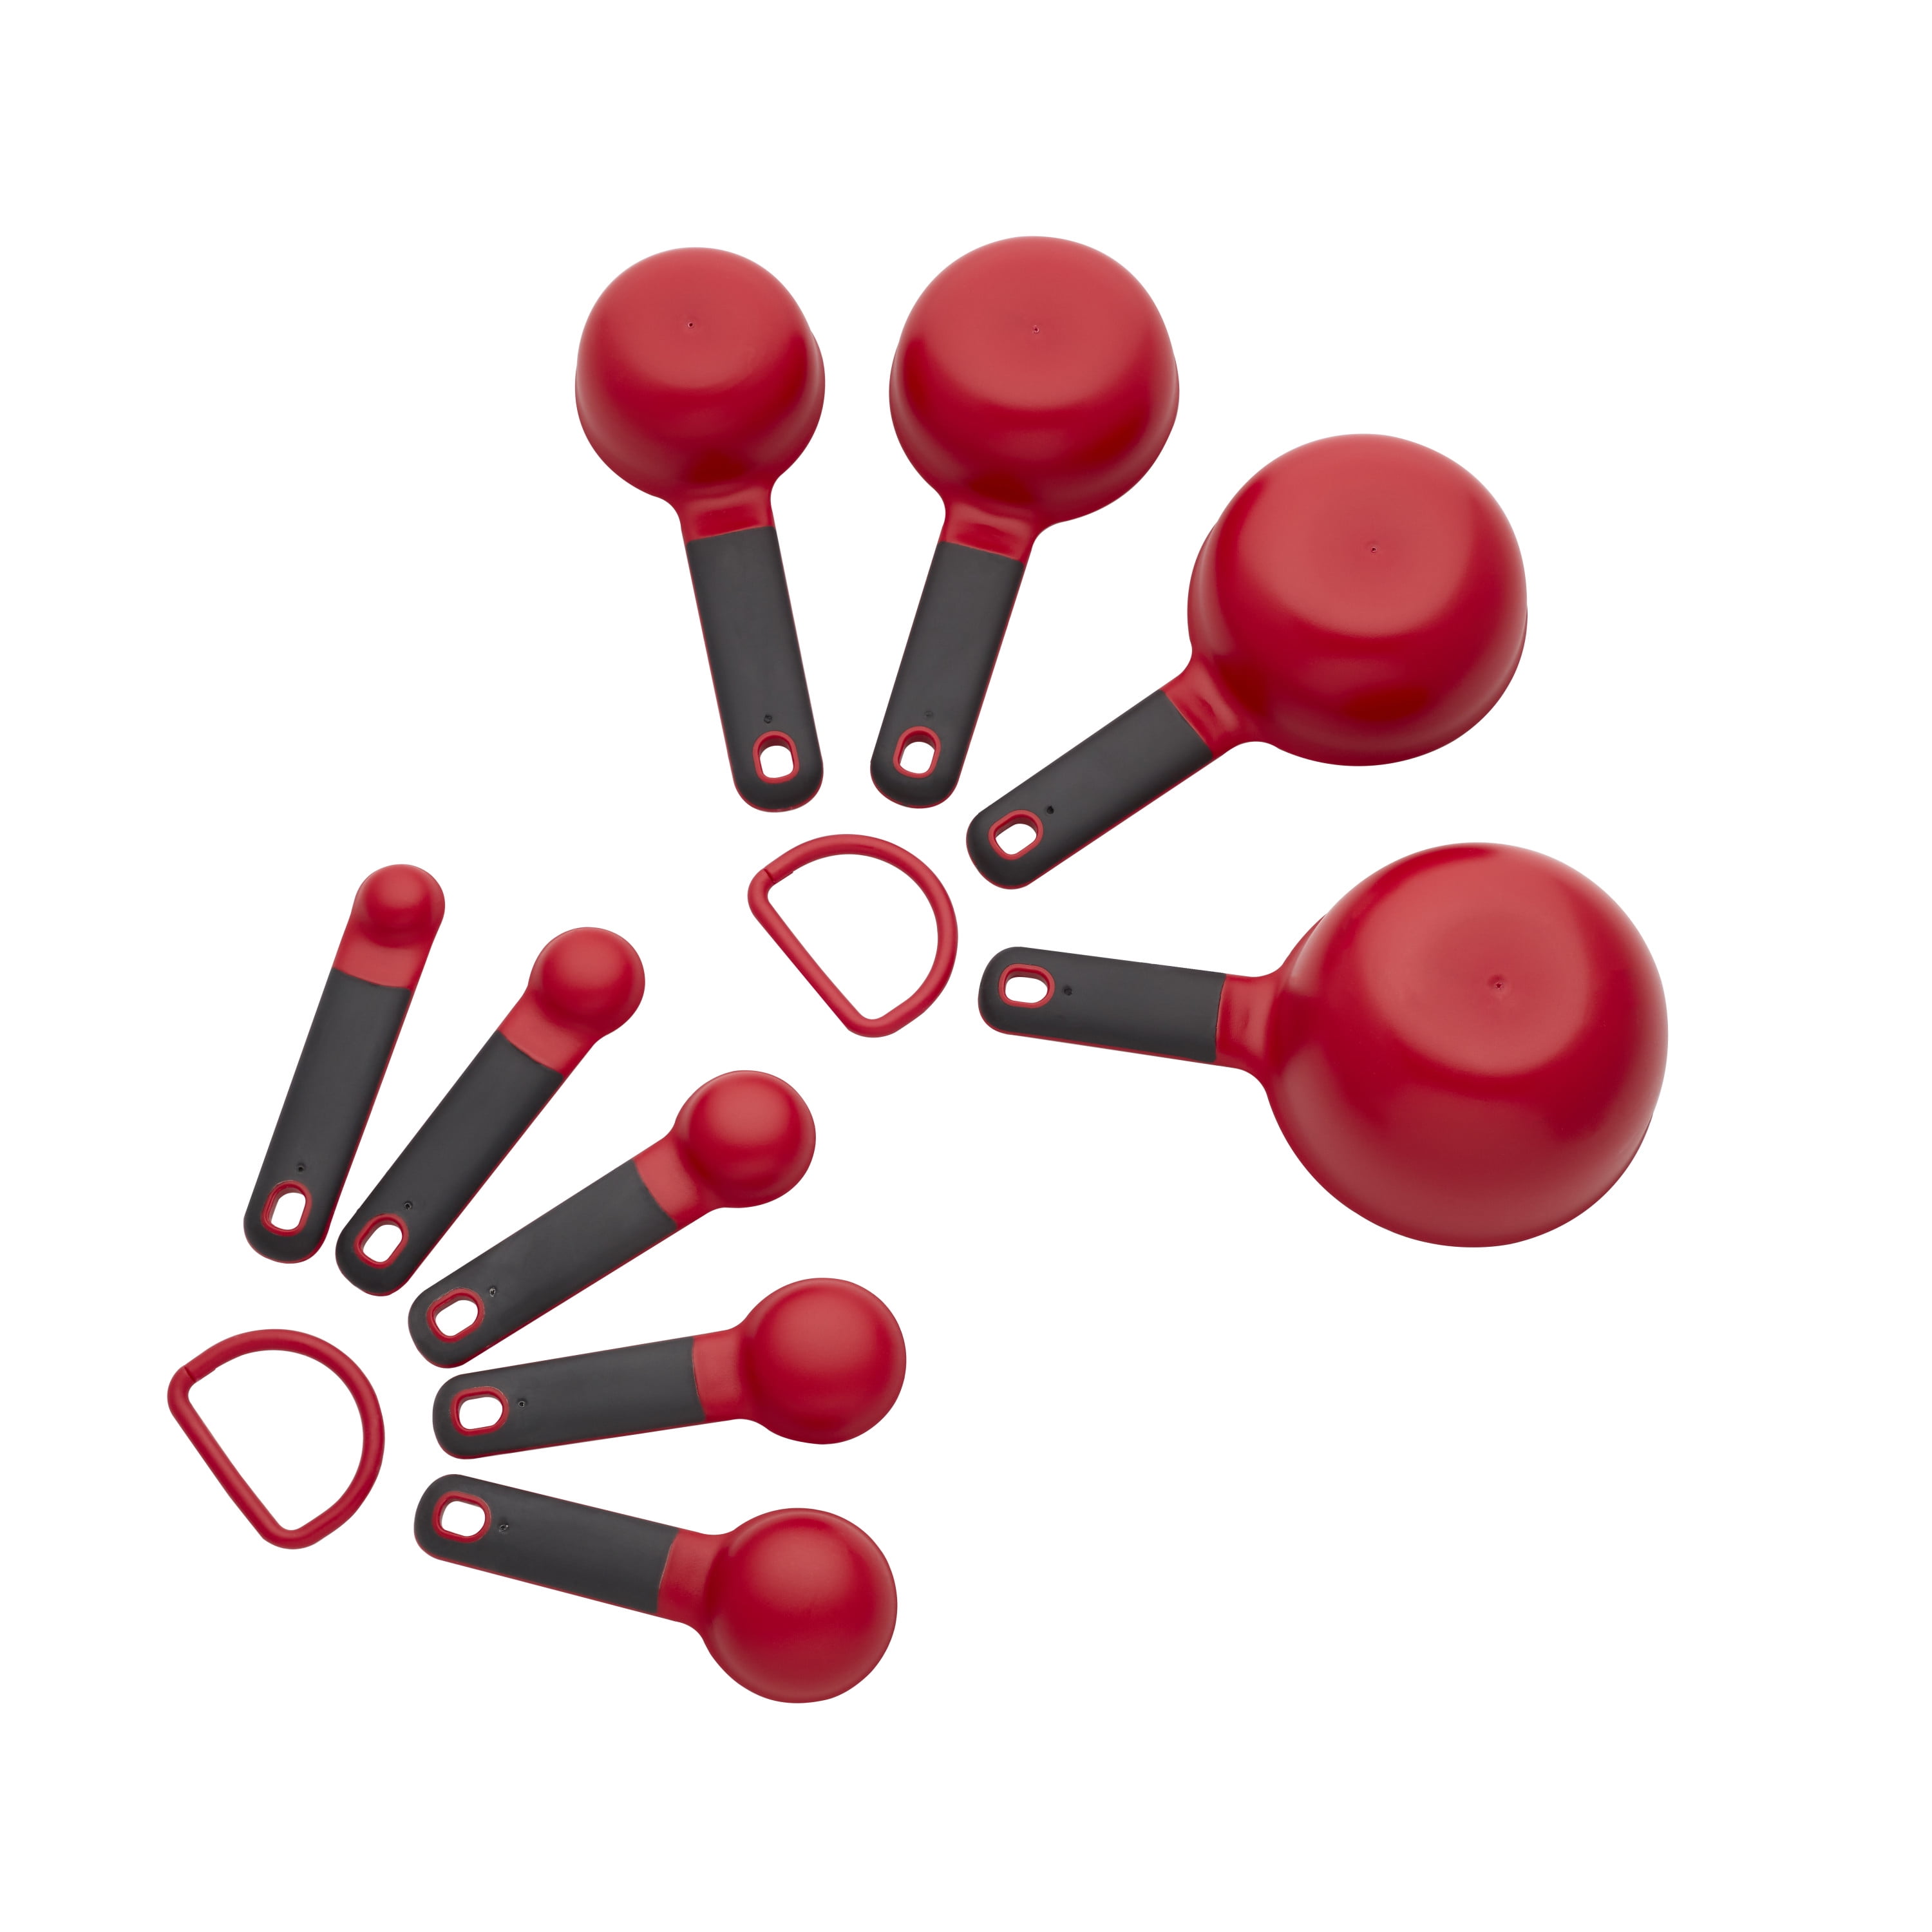 Set of 5 measuring spoons, Empire Red color - KitchenAid brand